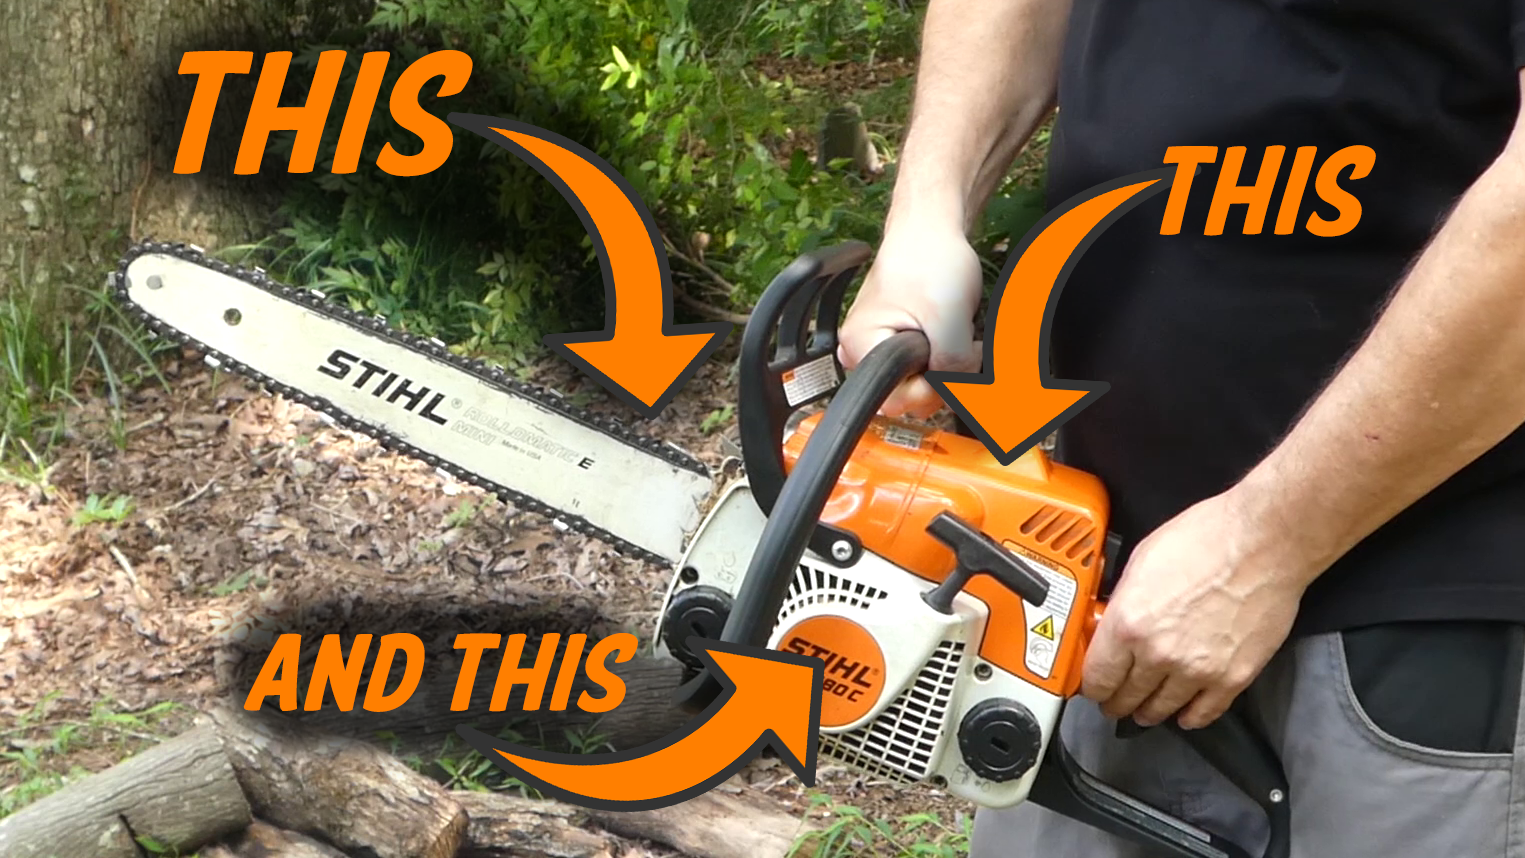 DIY - How to Install Bar and Chain on STIHL MS180 - Bob The Tool Man 